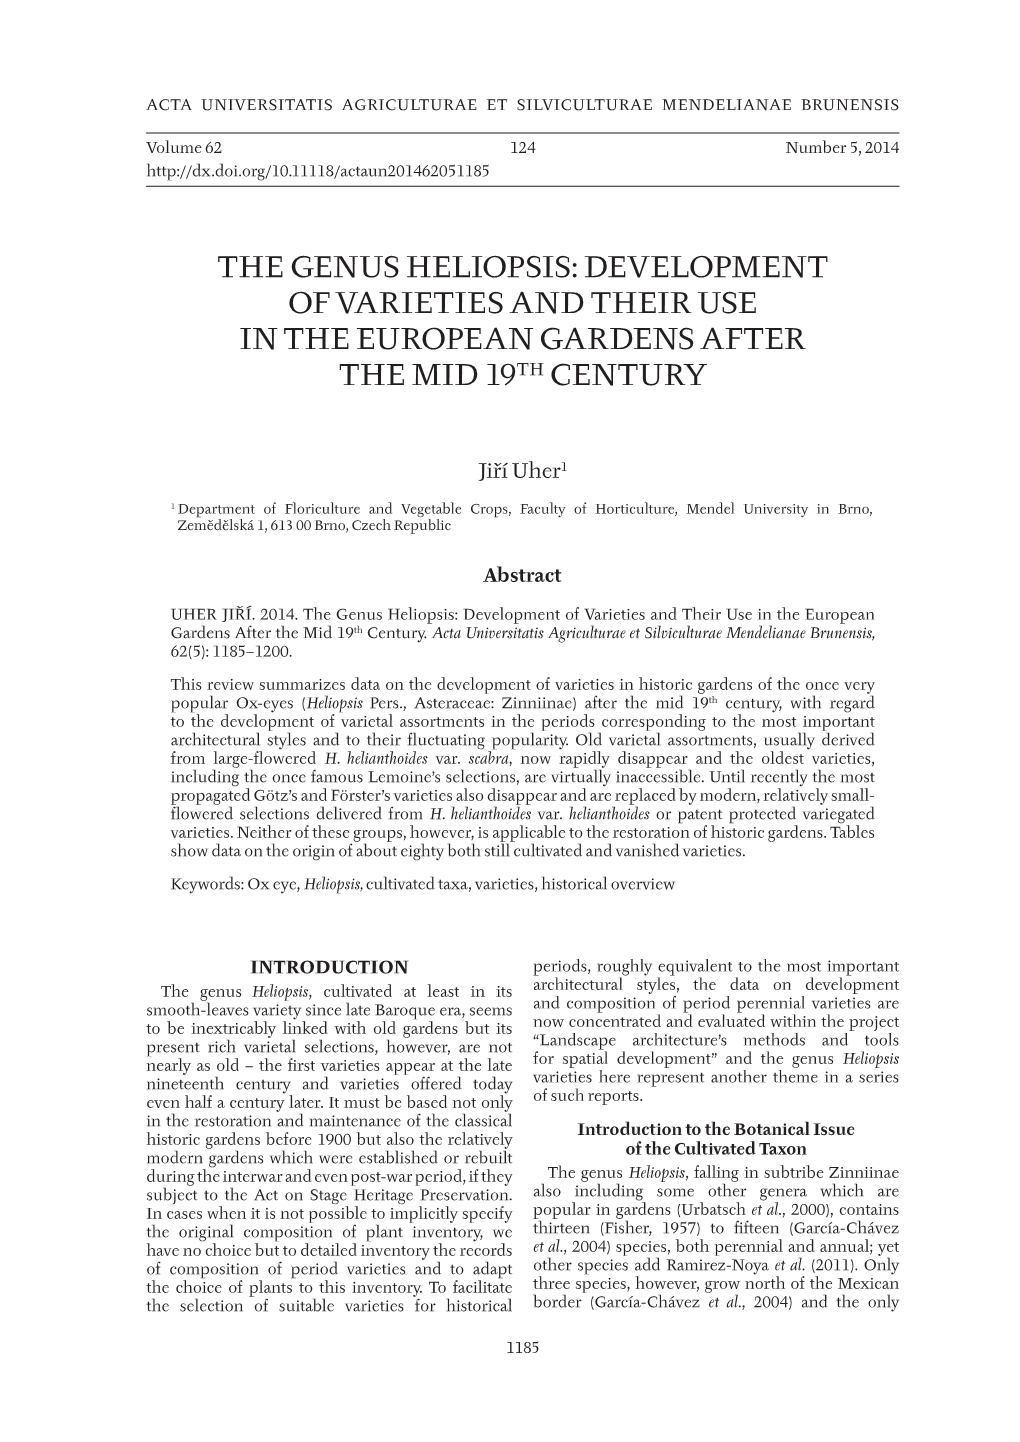 The Genus Heliopsis: Development of Varieties and Their Use in the European Gardens After the Mid 19Th Century